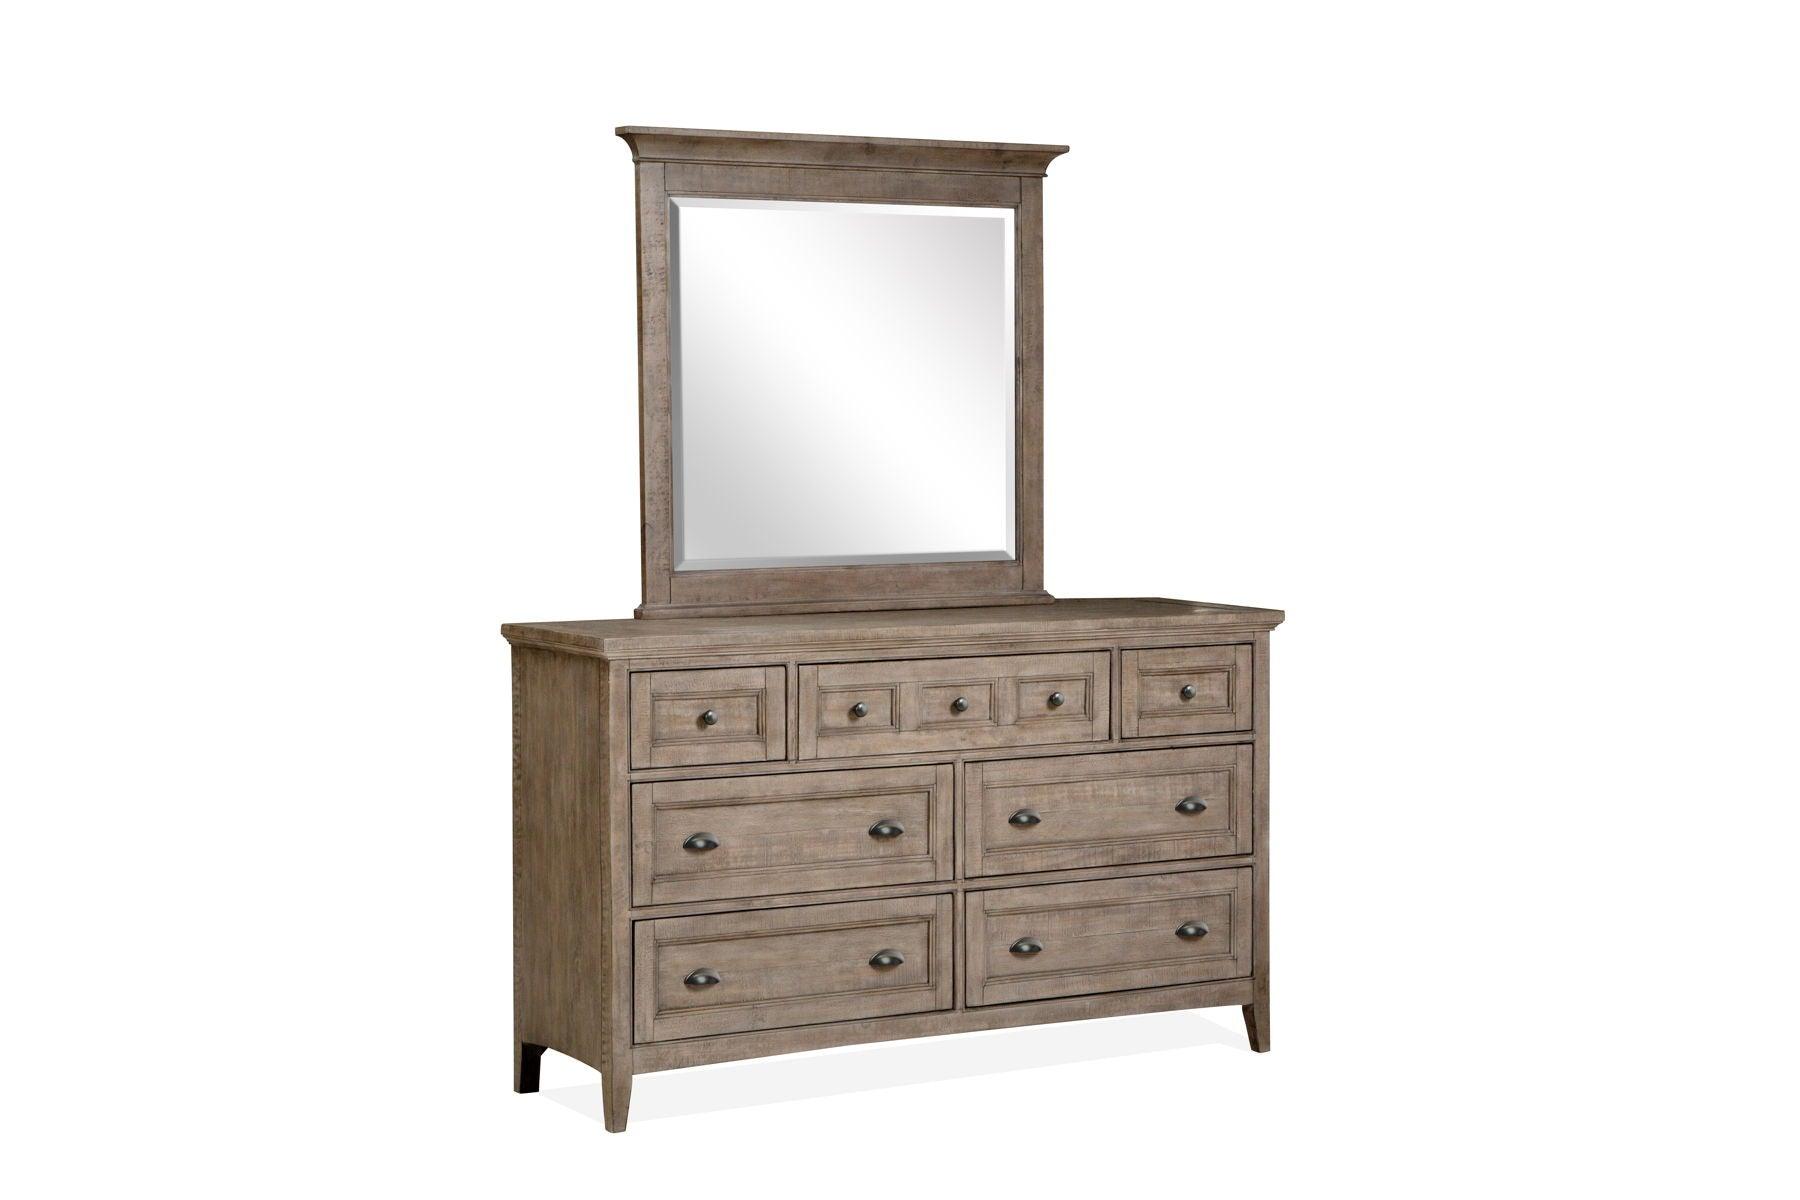 Magnussen Furniture - Paxton Place - Wood Drawer Dresser - Dove Tail Grey - 5th Avenue Furniture